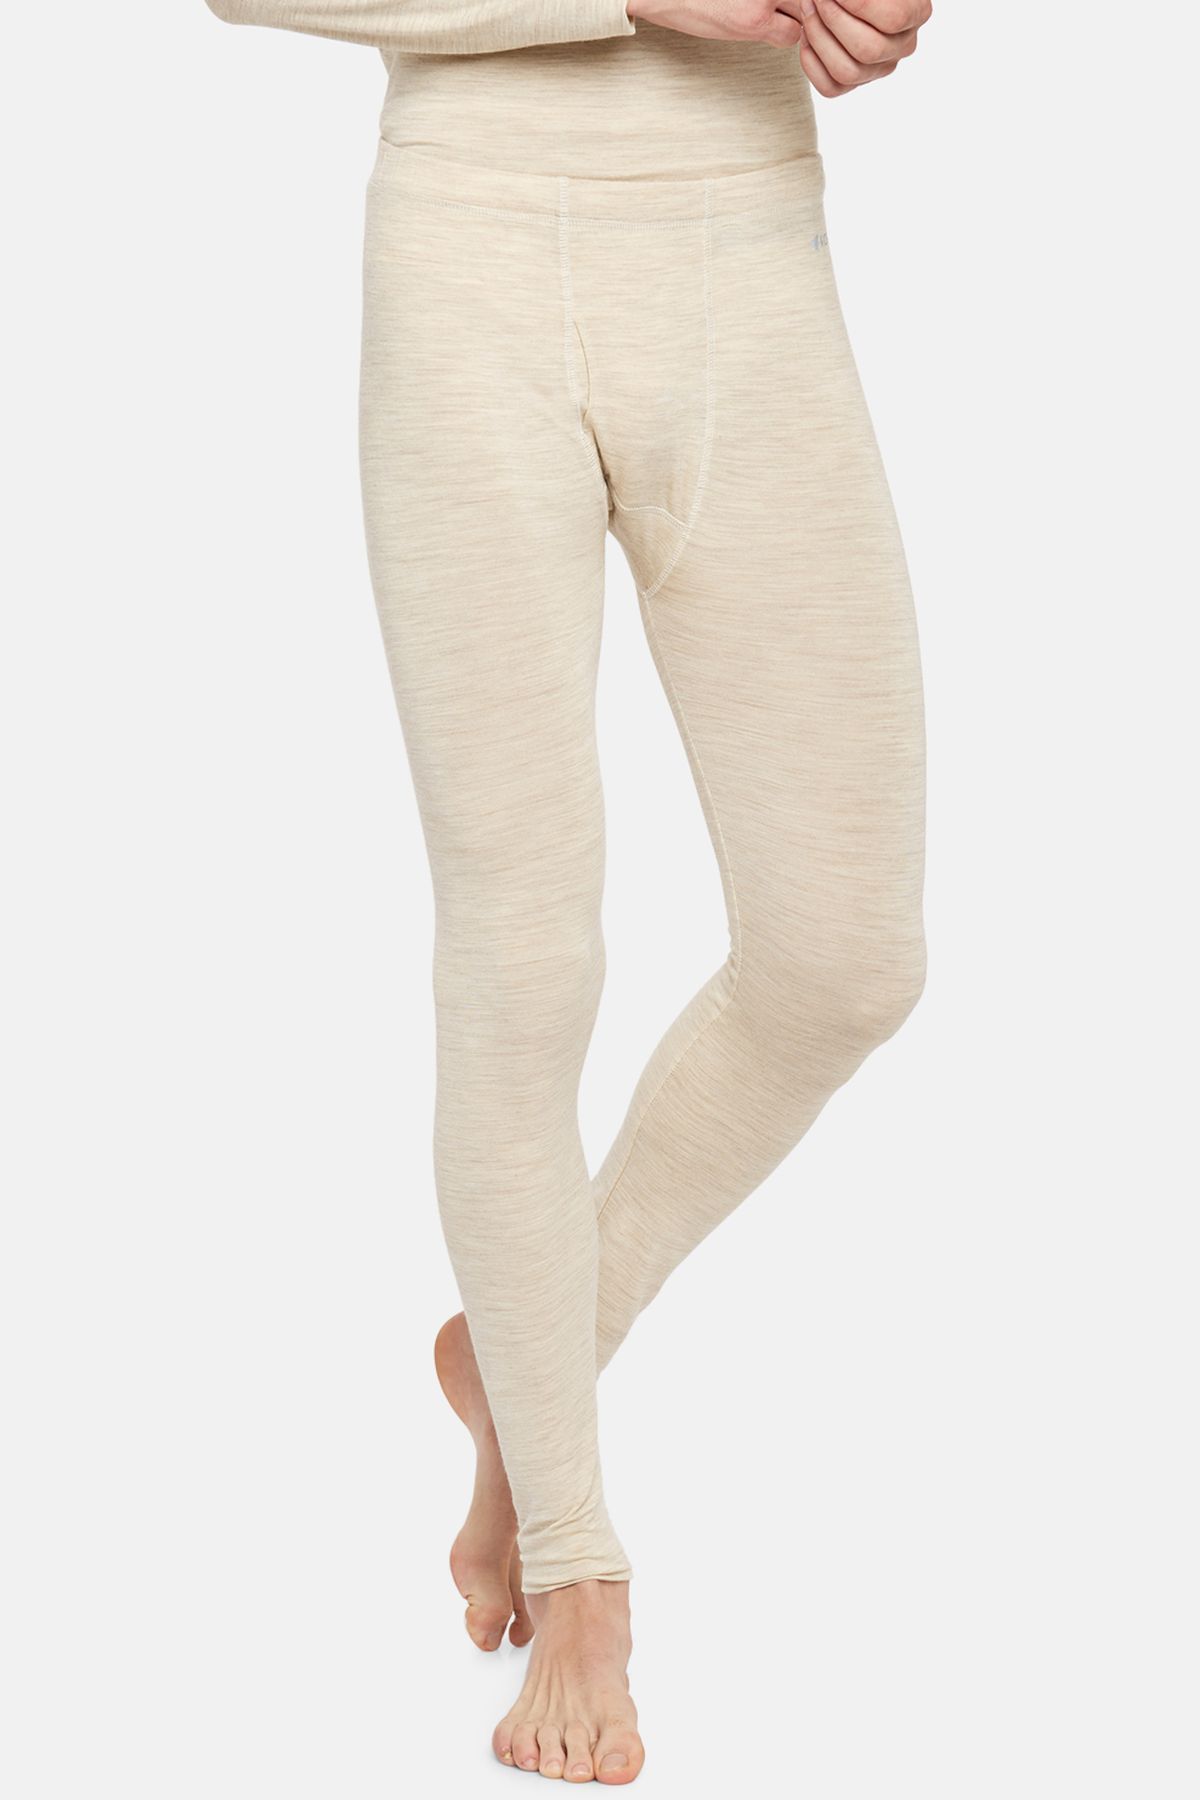 Men's Thermals | Buy the softest thermals by Kosha